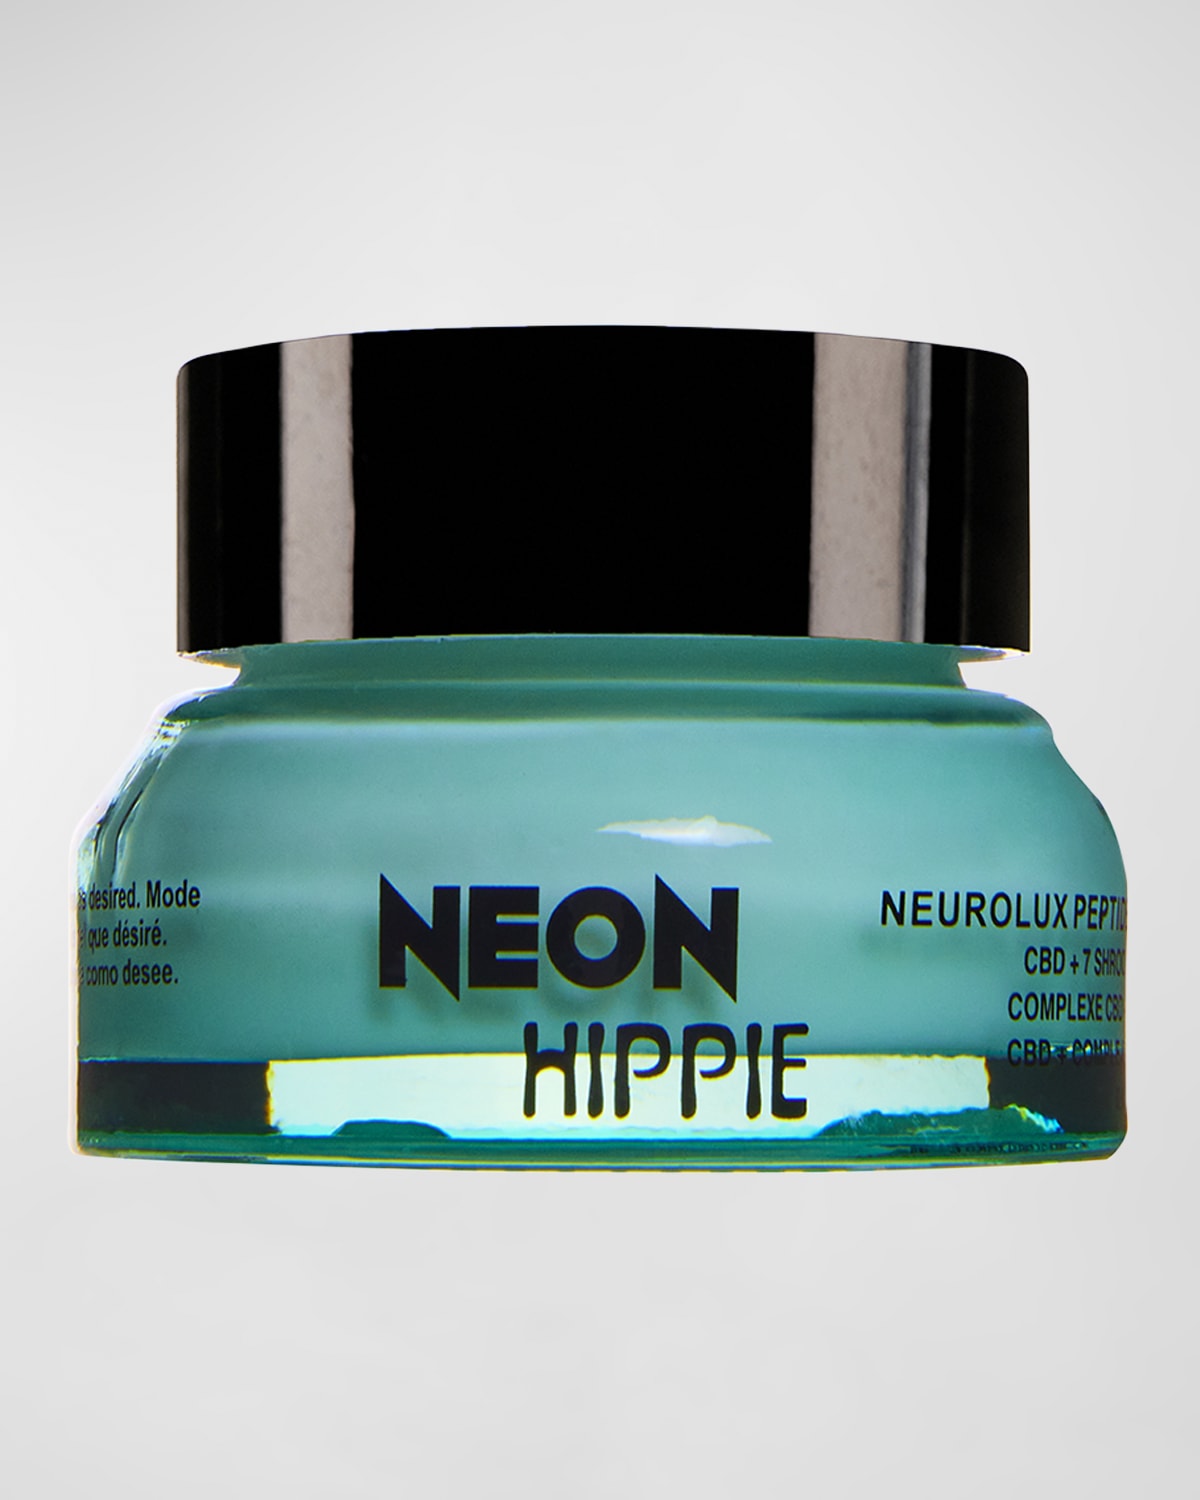 Neurolux Cream Deluxe, Yours with any $25 Neon Hippie Purchase